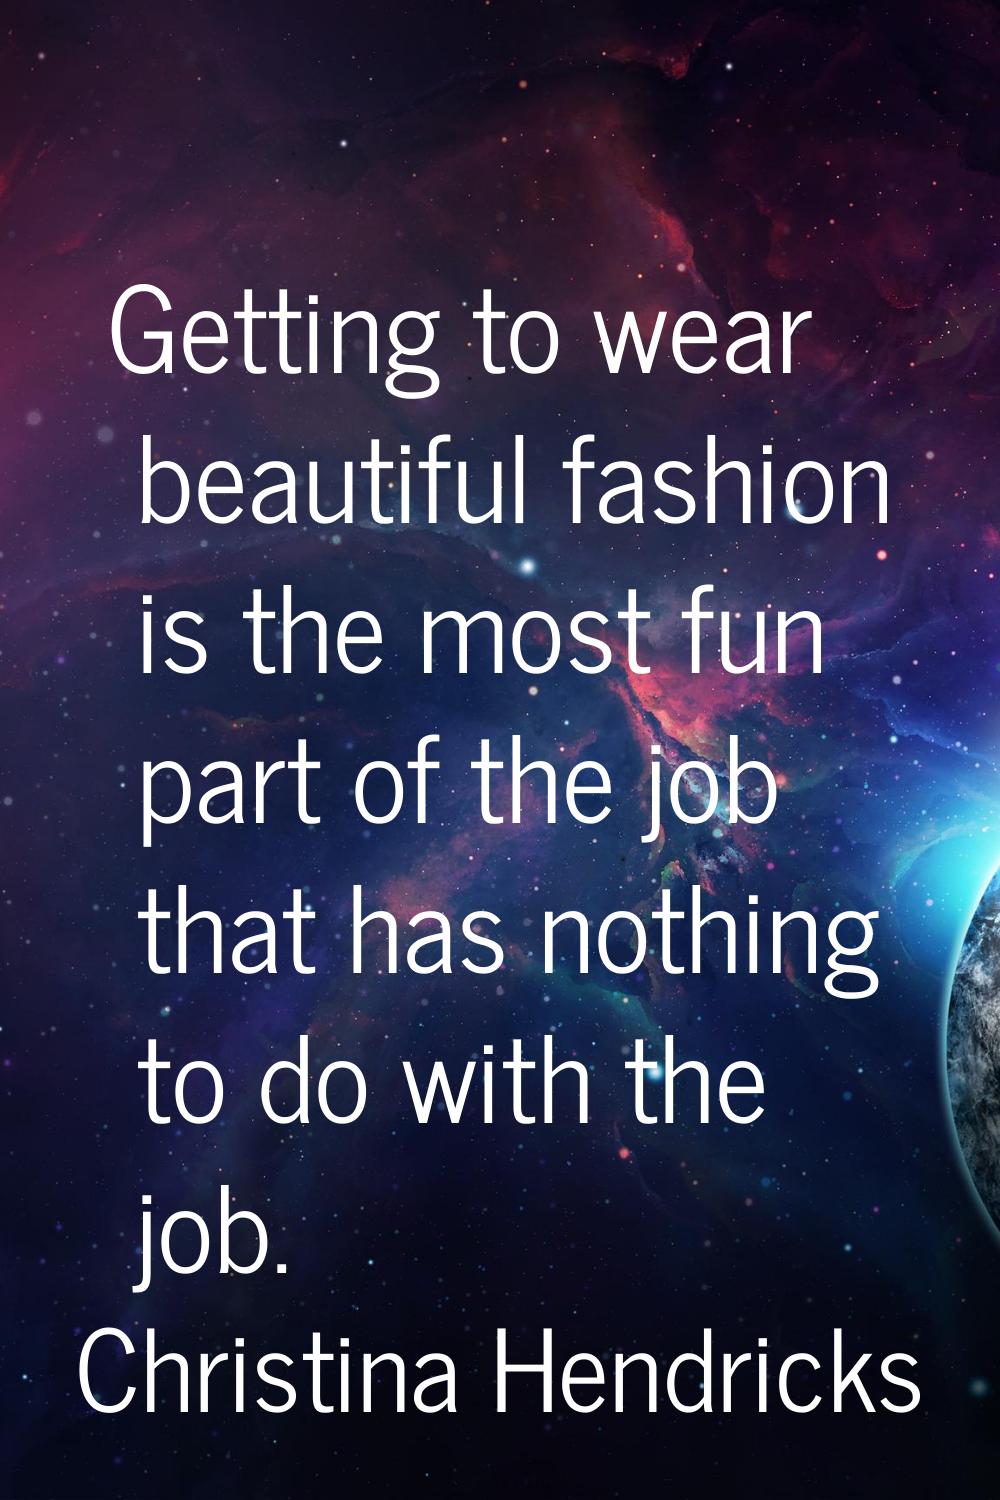 Getting to wear beautiful fashion is the most fun part of the job that has nothing to do with the j